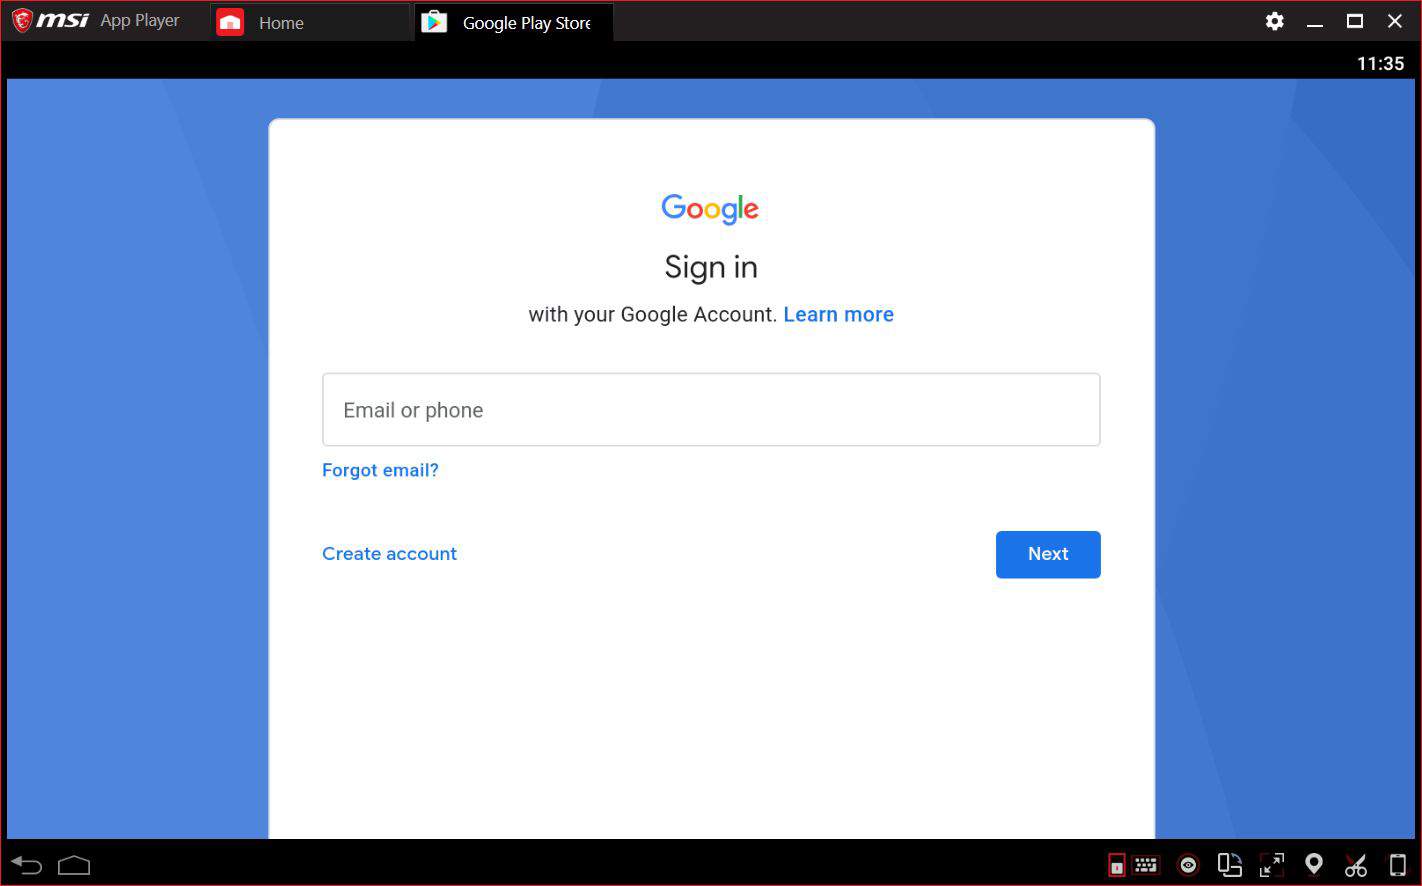 Sign in to google play store using your Gmail Accounts